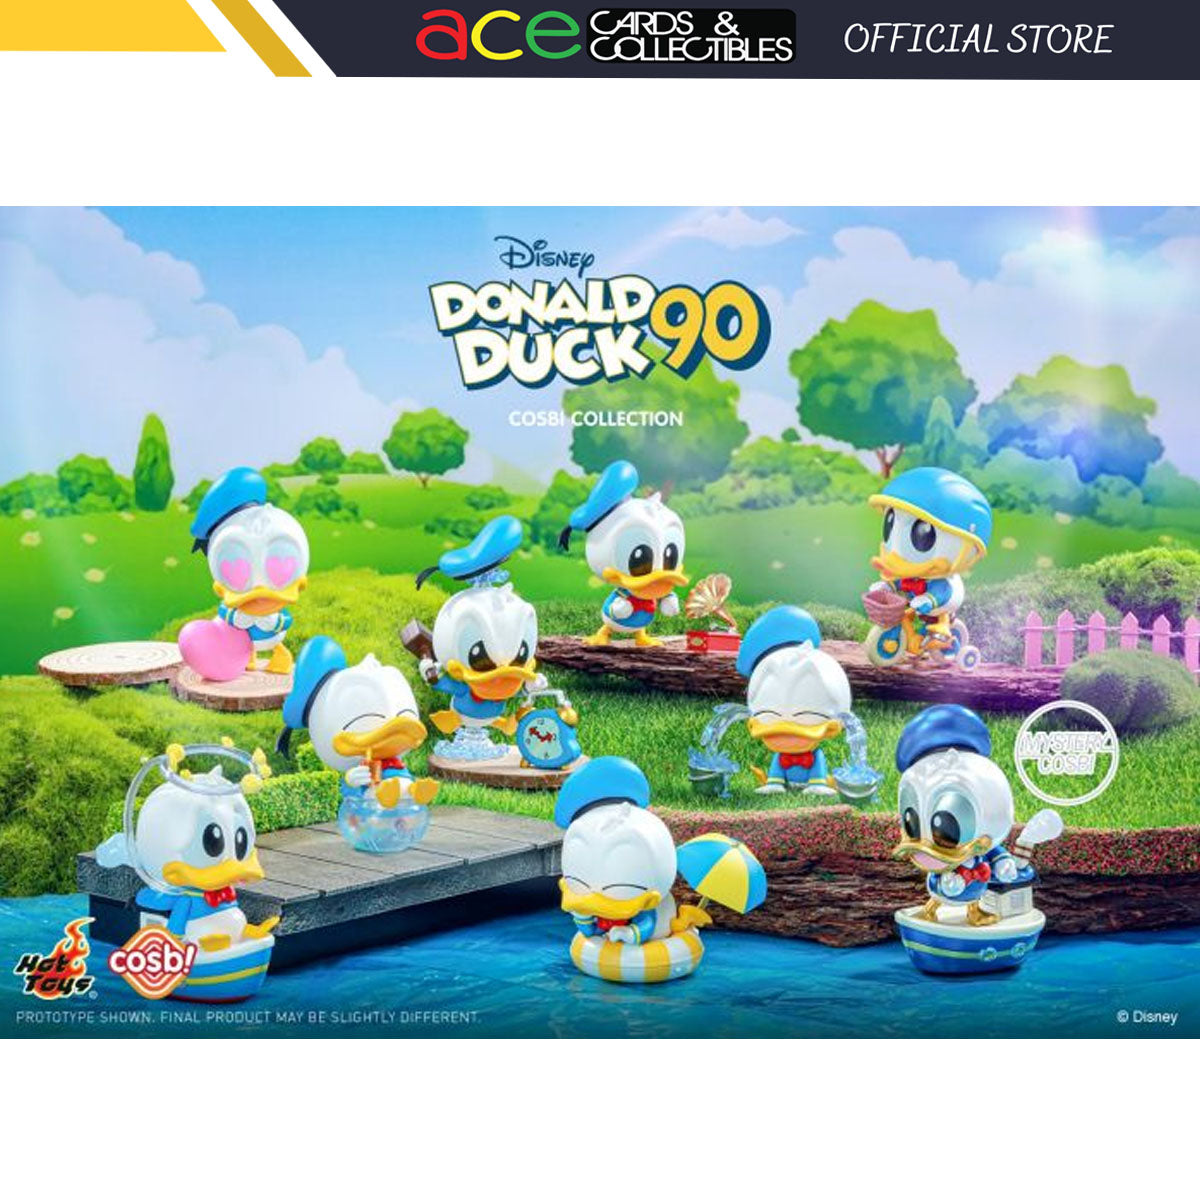 Donald Duck Cosbi Collection-Single Box (Random)-Cosbi-Ace Cards & Collectibles